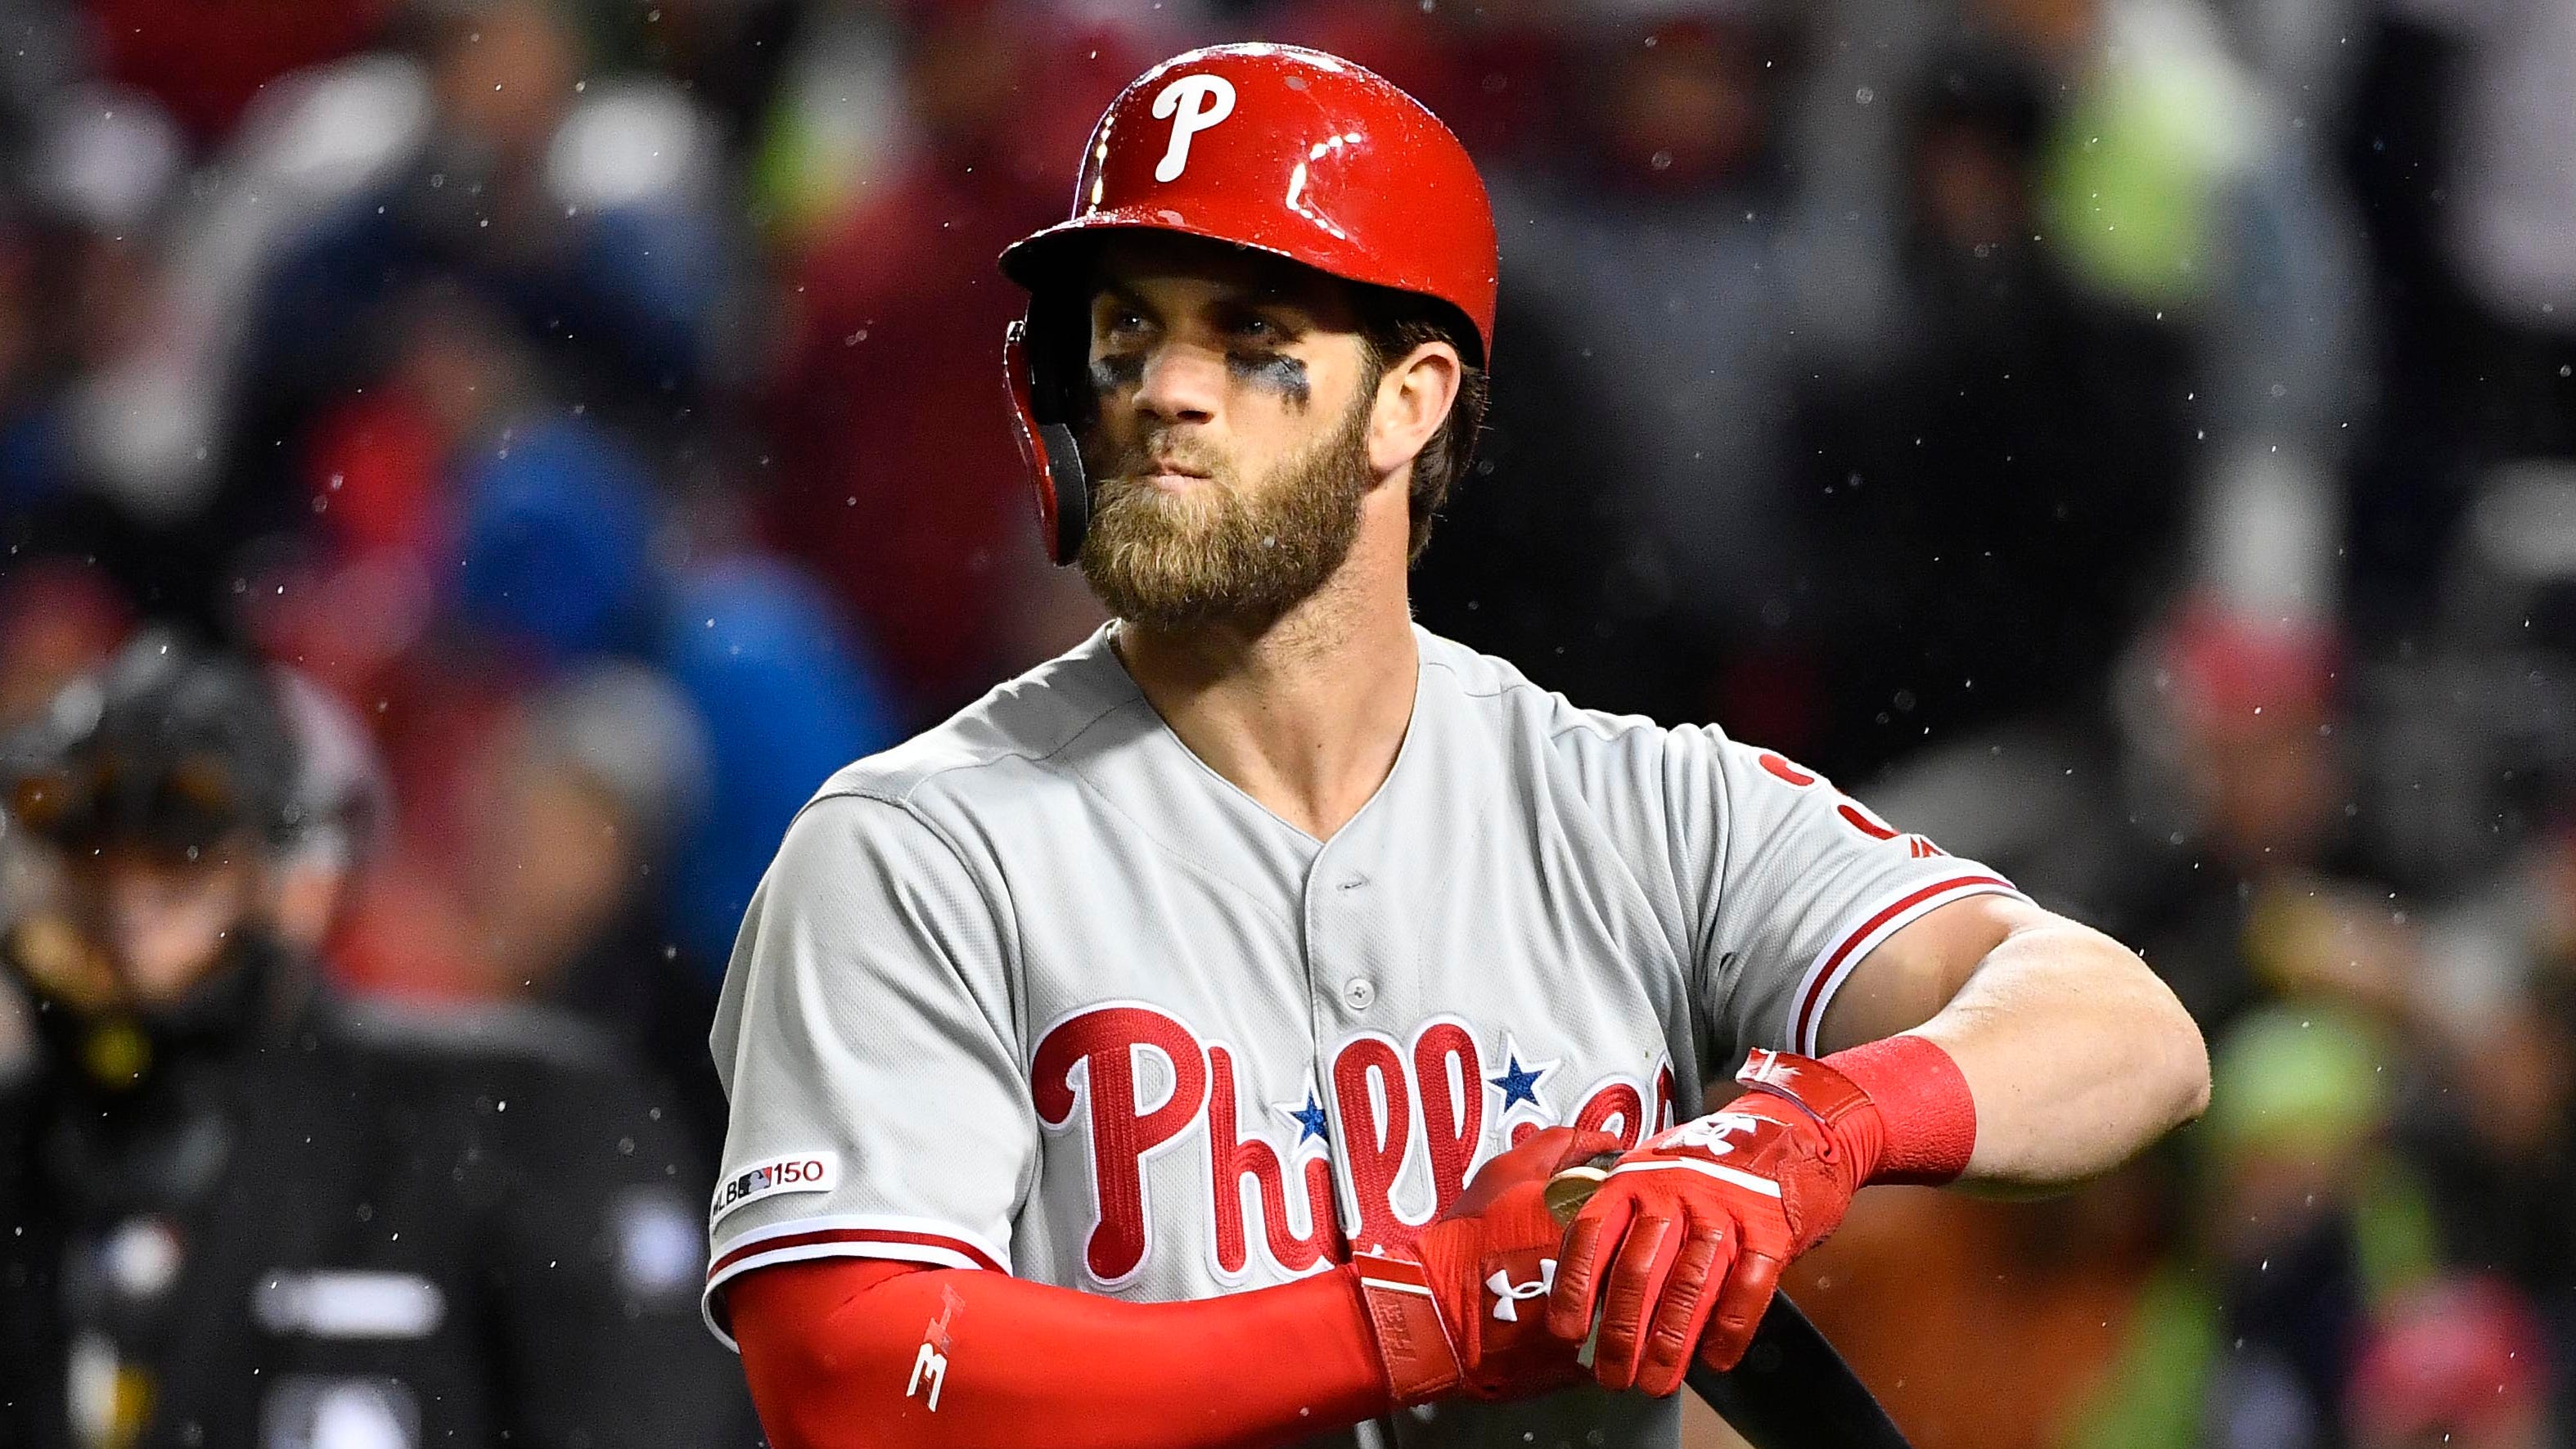 Bryce Harper Phillies OF booed, but homers in return to Washington